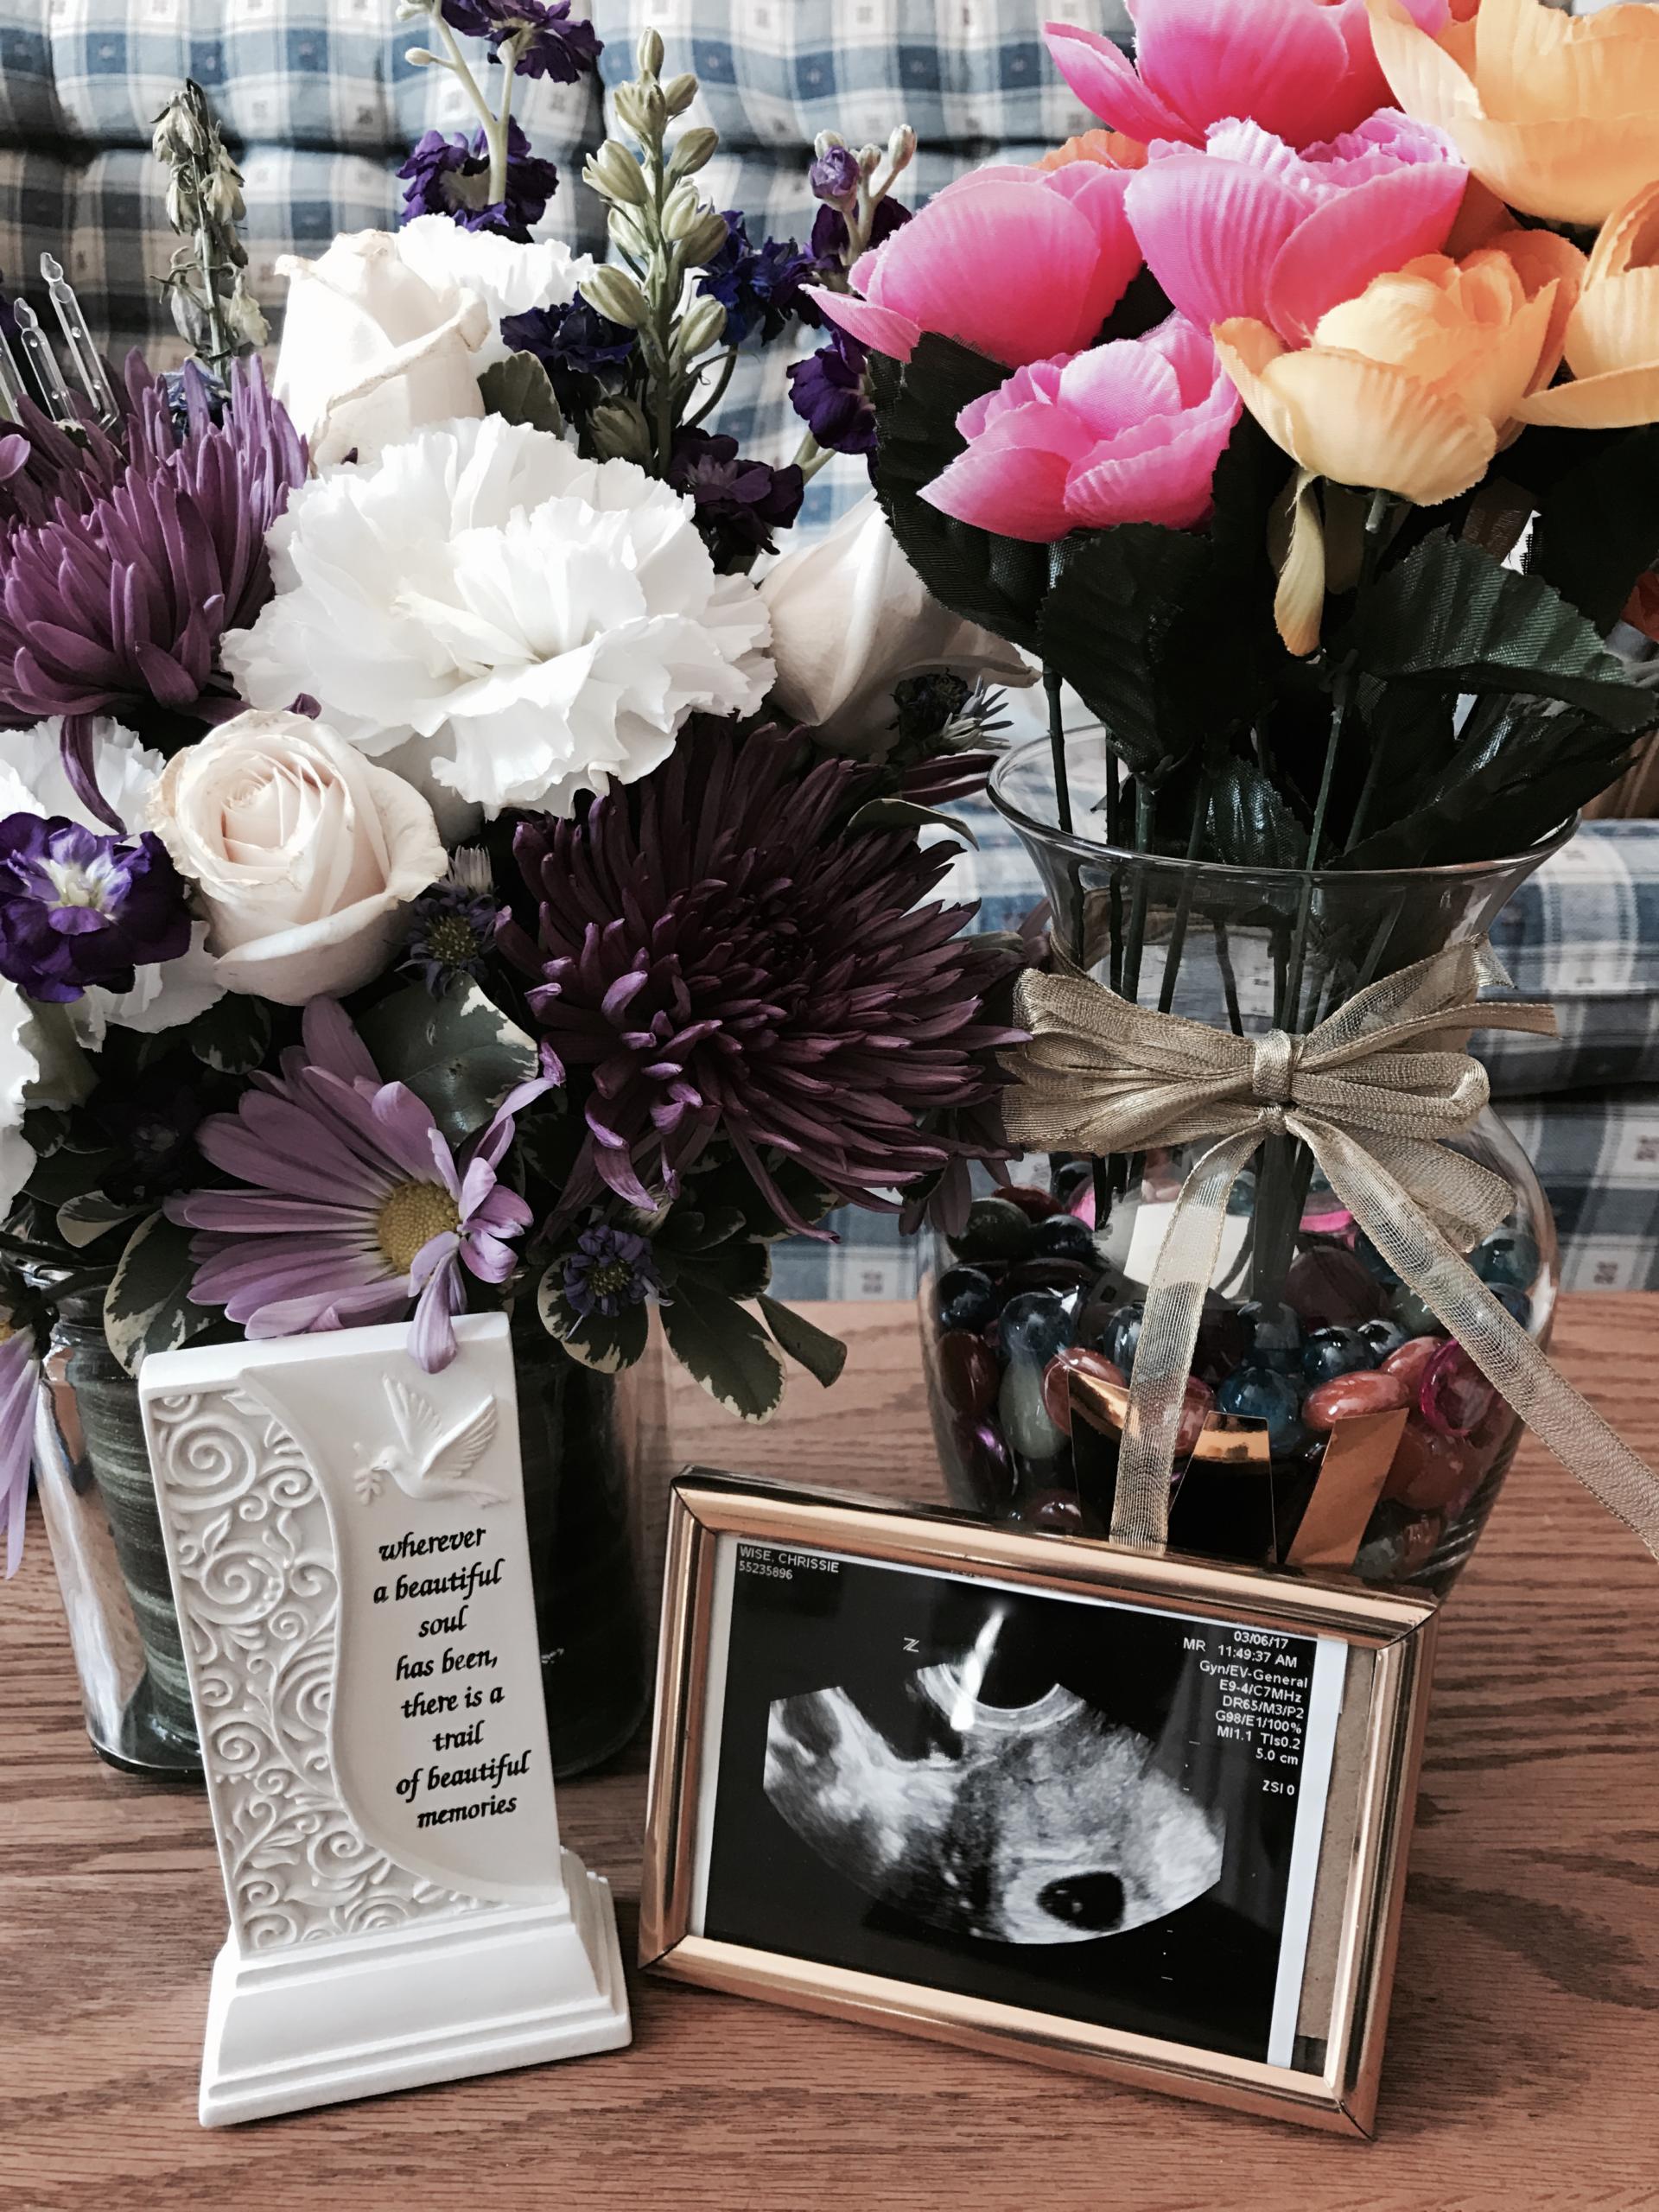 We Were Pregnant…Our Miscarriage Story